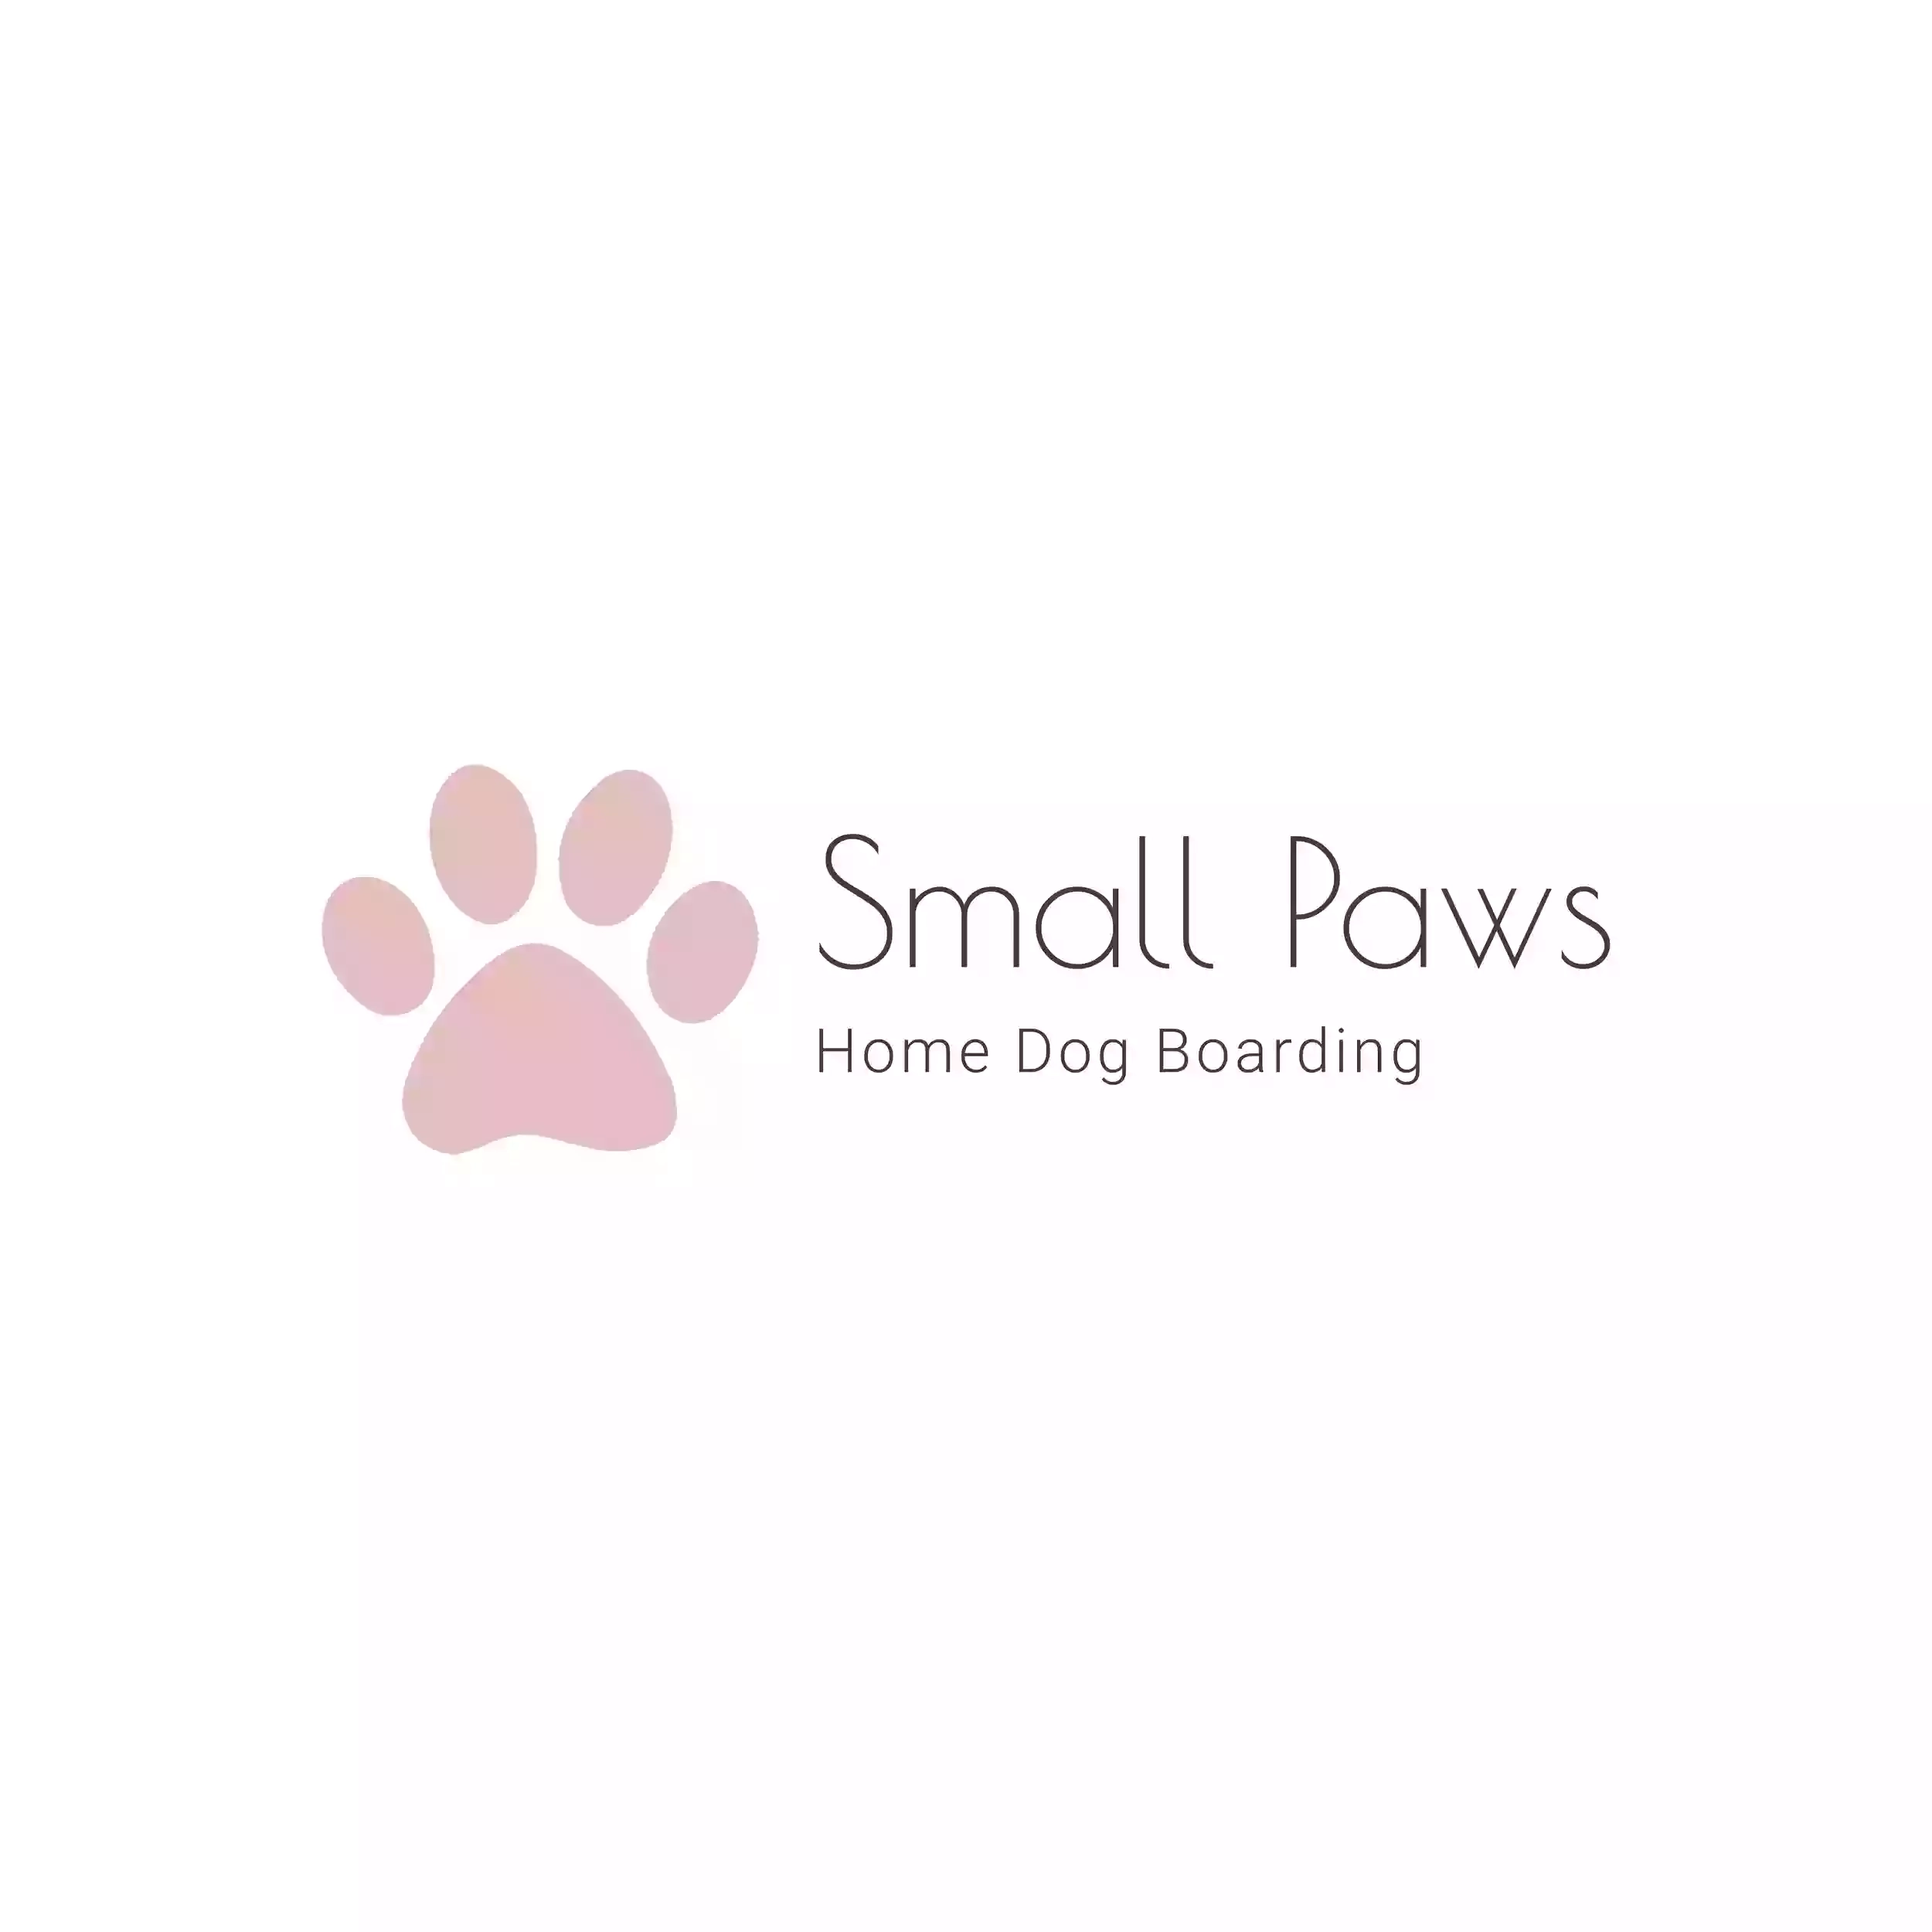 Small Paws Home Dog Boarding, Doggy Day Care and Dog Wash & Blow Drying